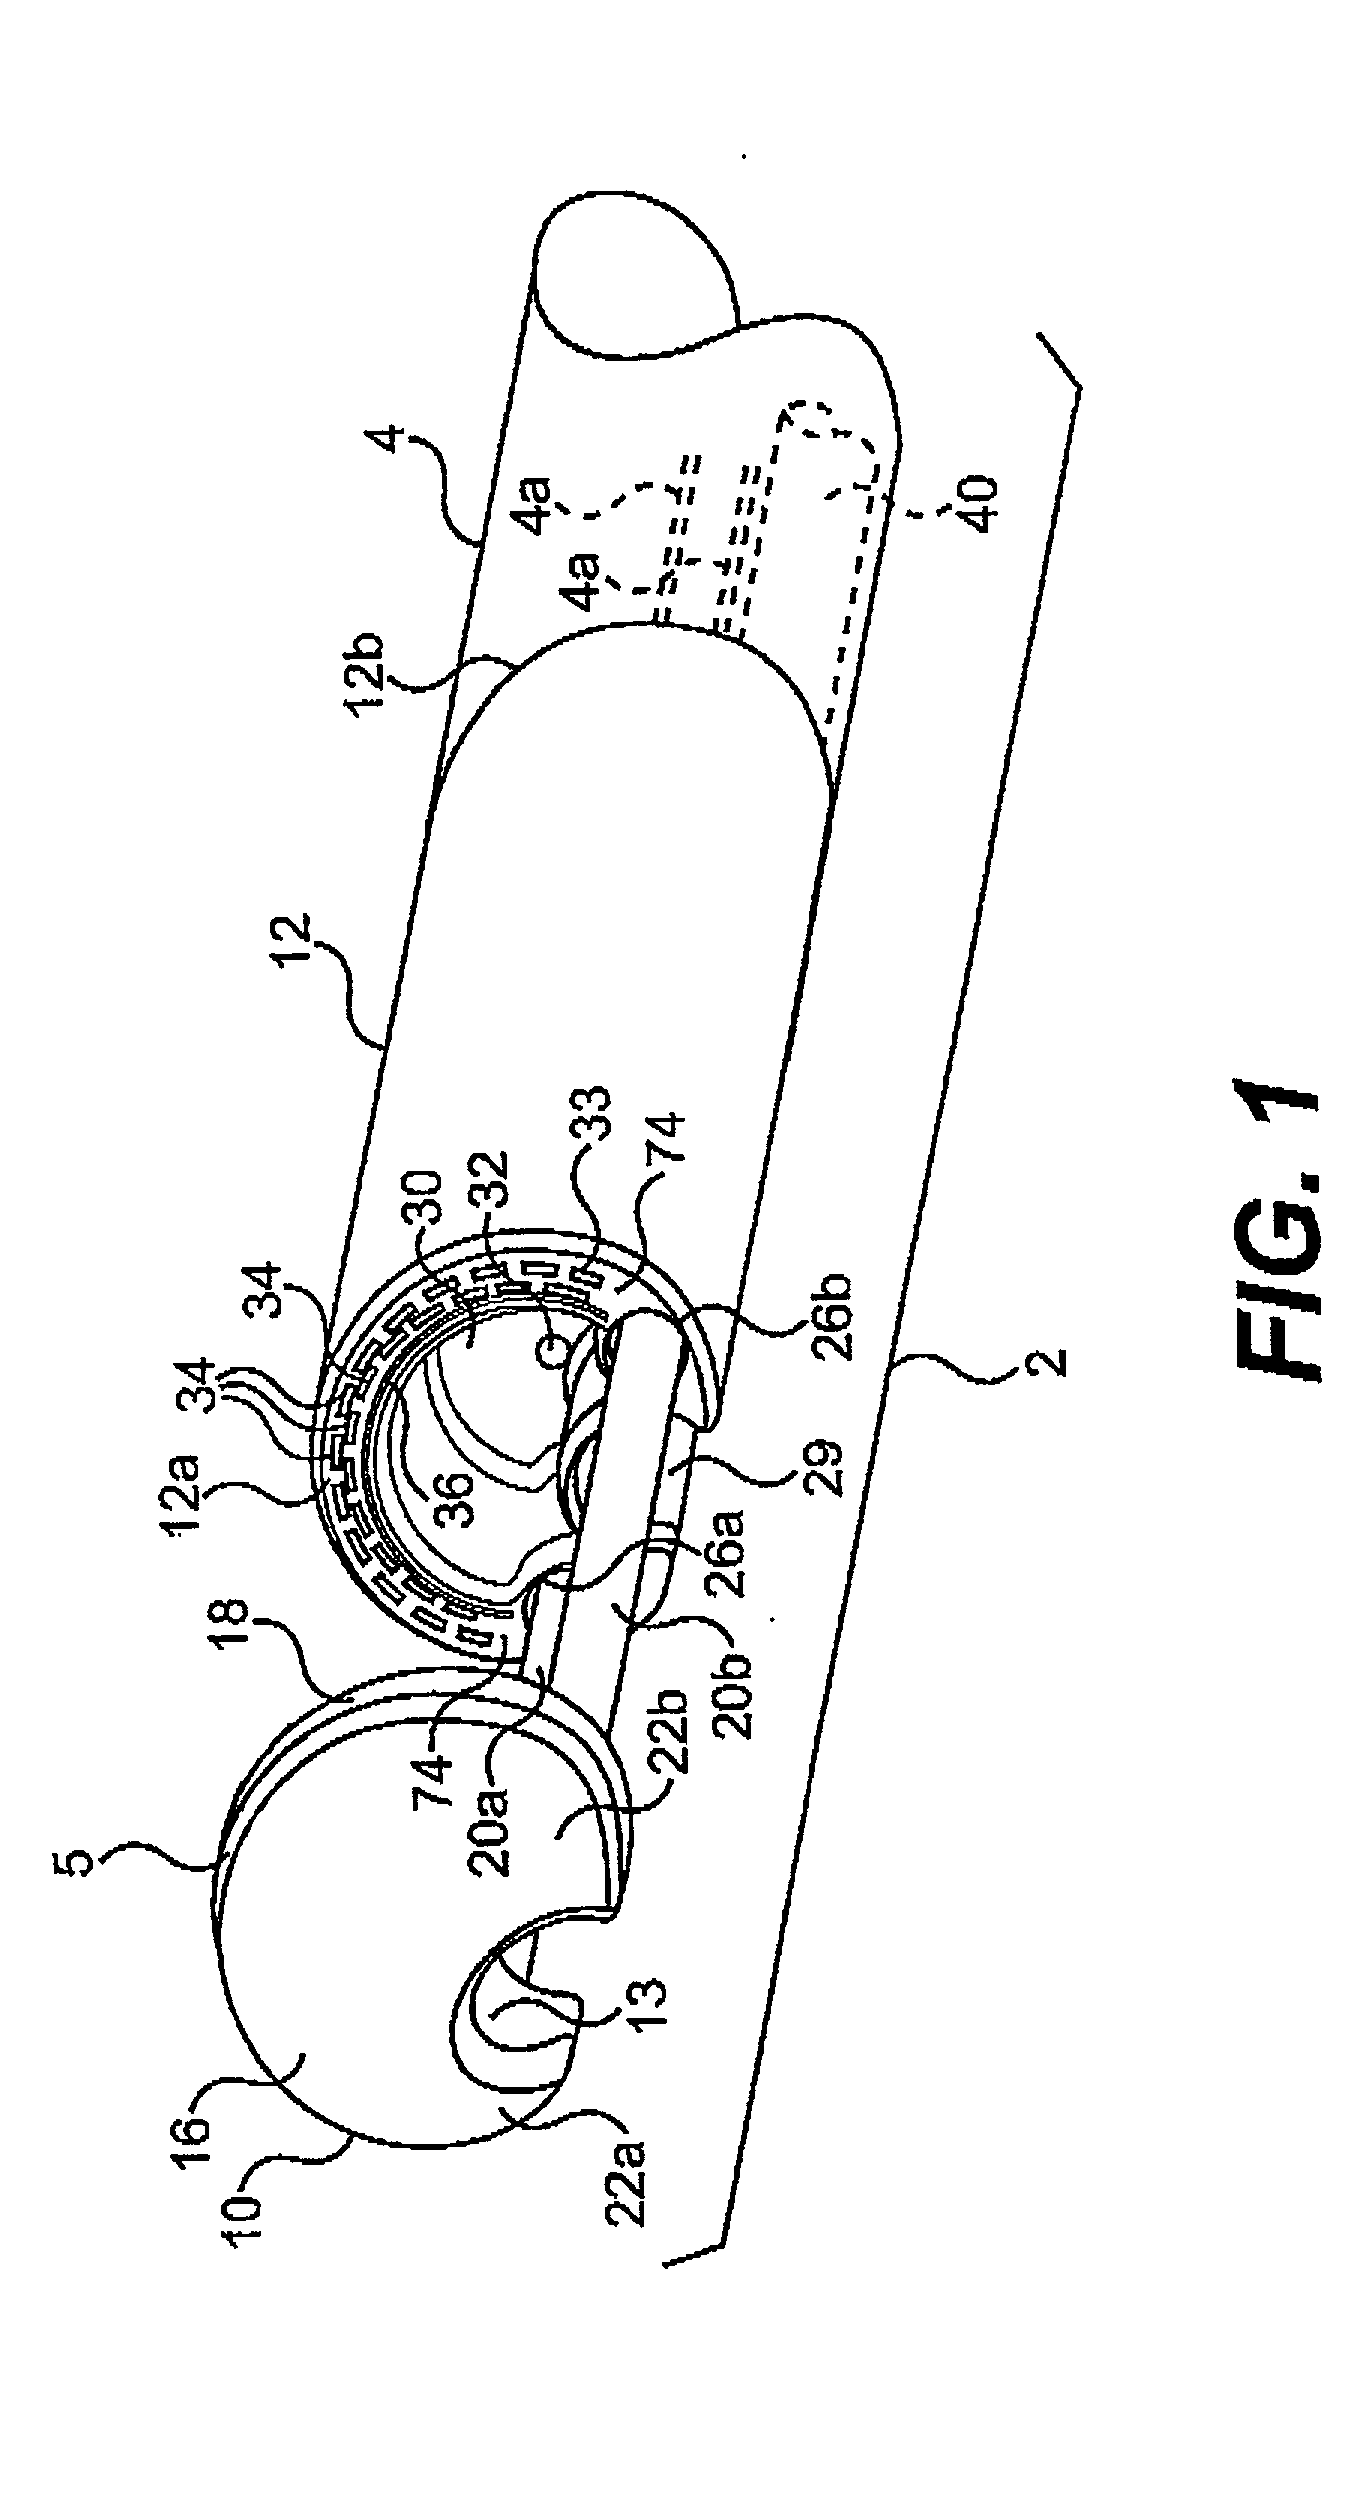 Non-circular resection device and endoscope